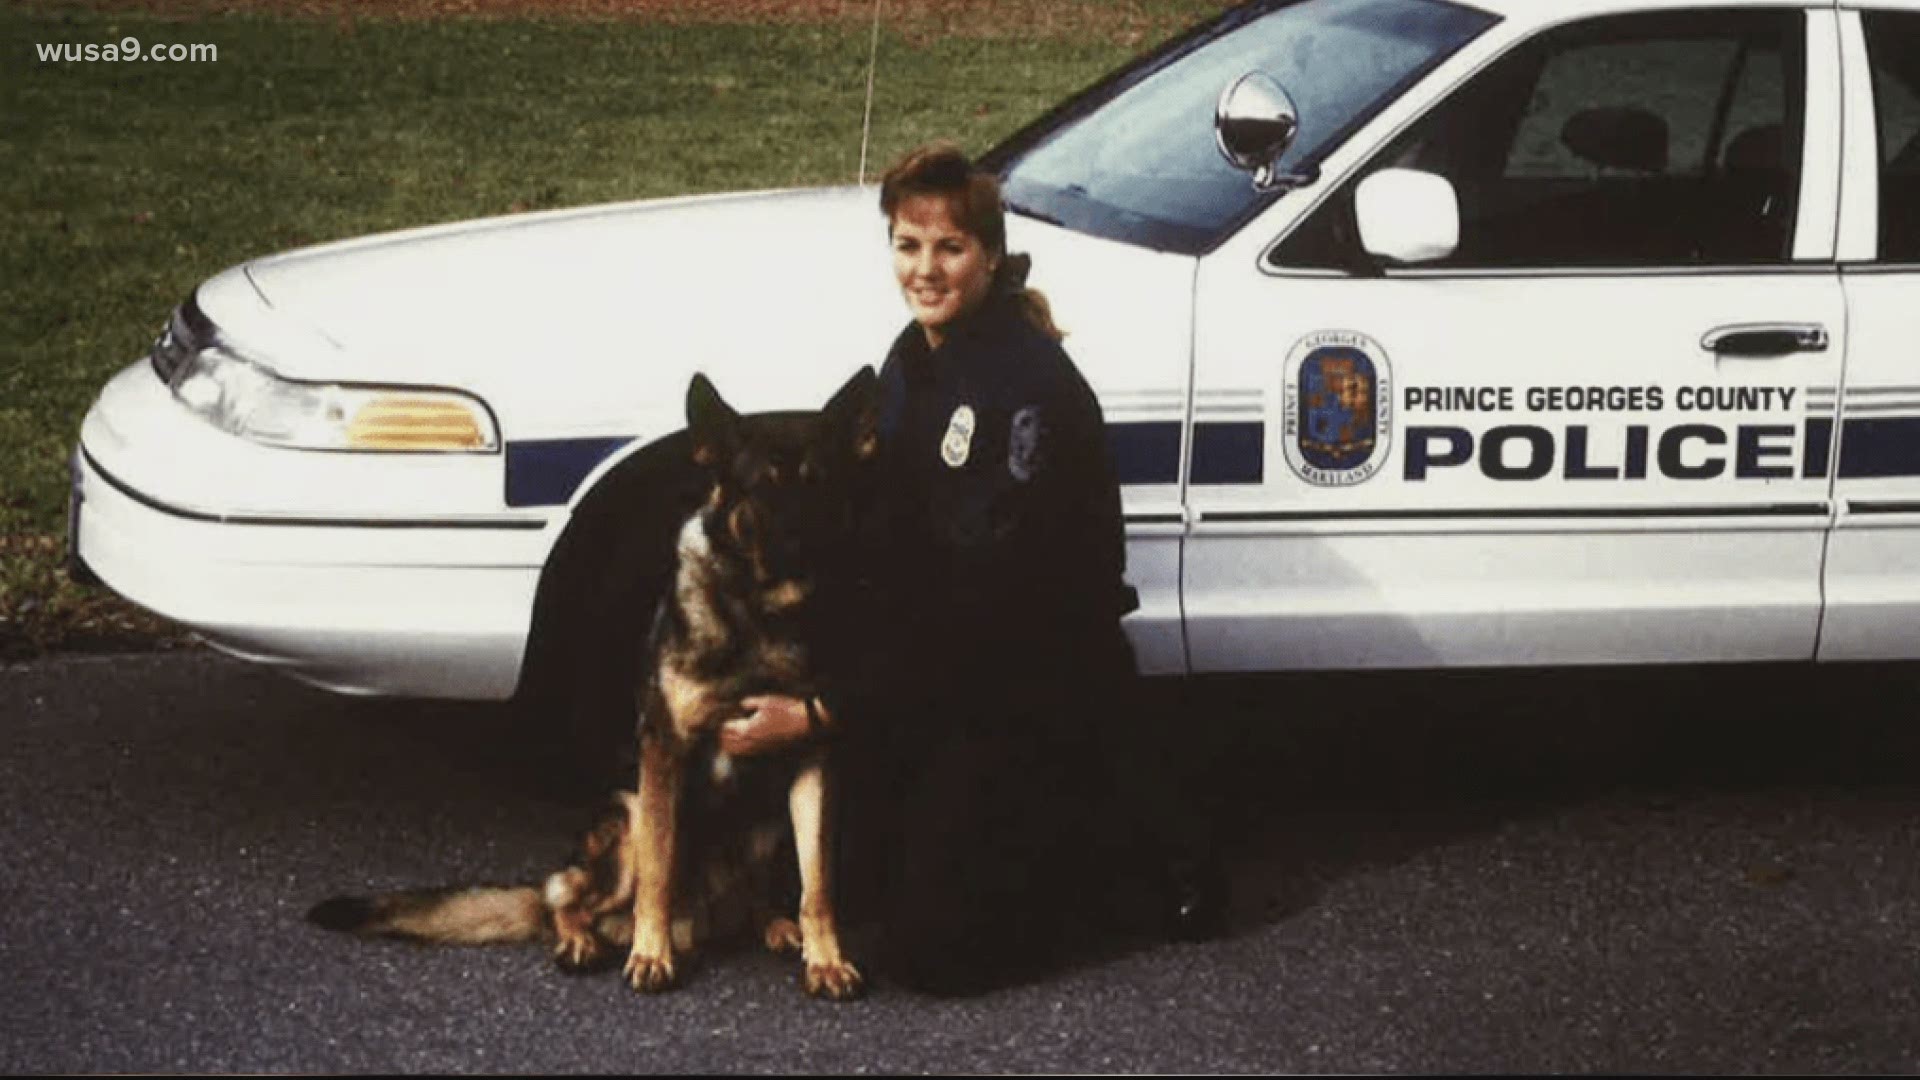 Stephanie Mohr was convicted of allowing her police dog to maul an unarmed, handcuffed man back in 1995.